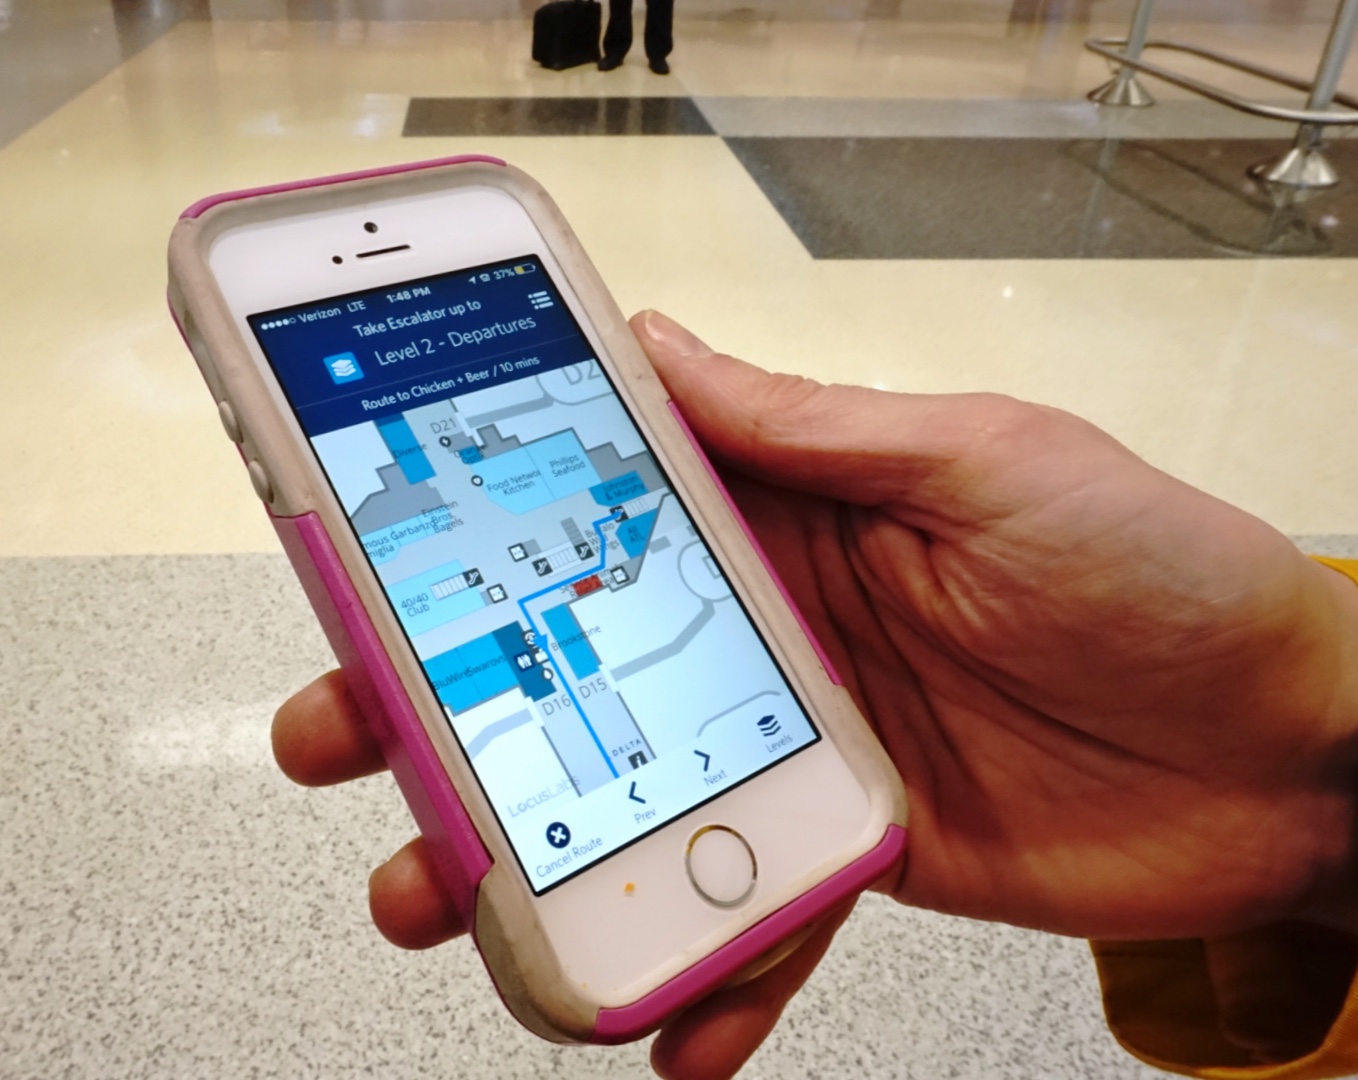 New Fly Delta App Makes Airport Travel Even Easier